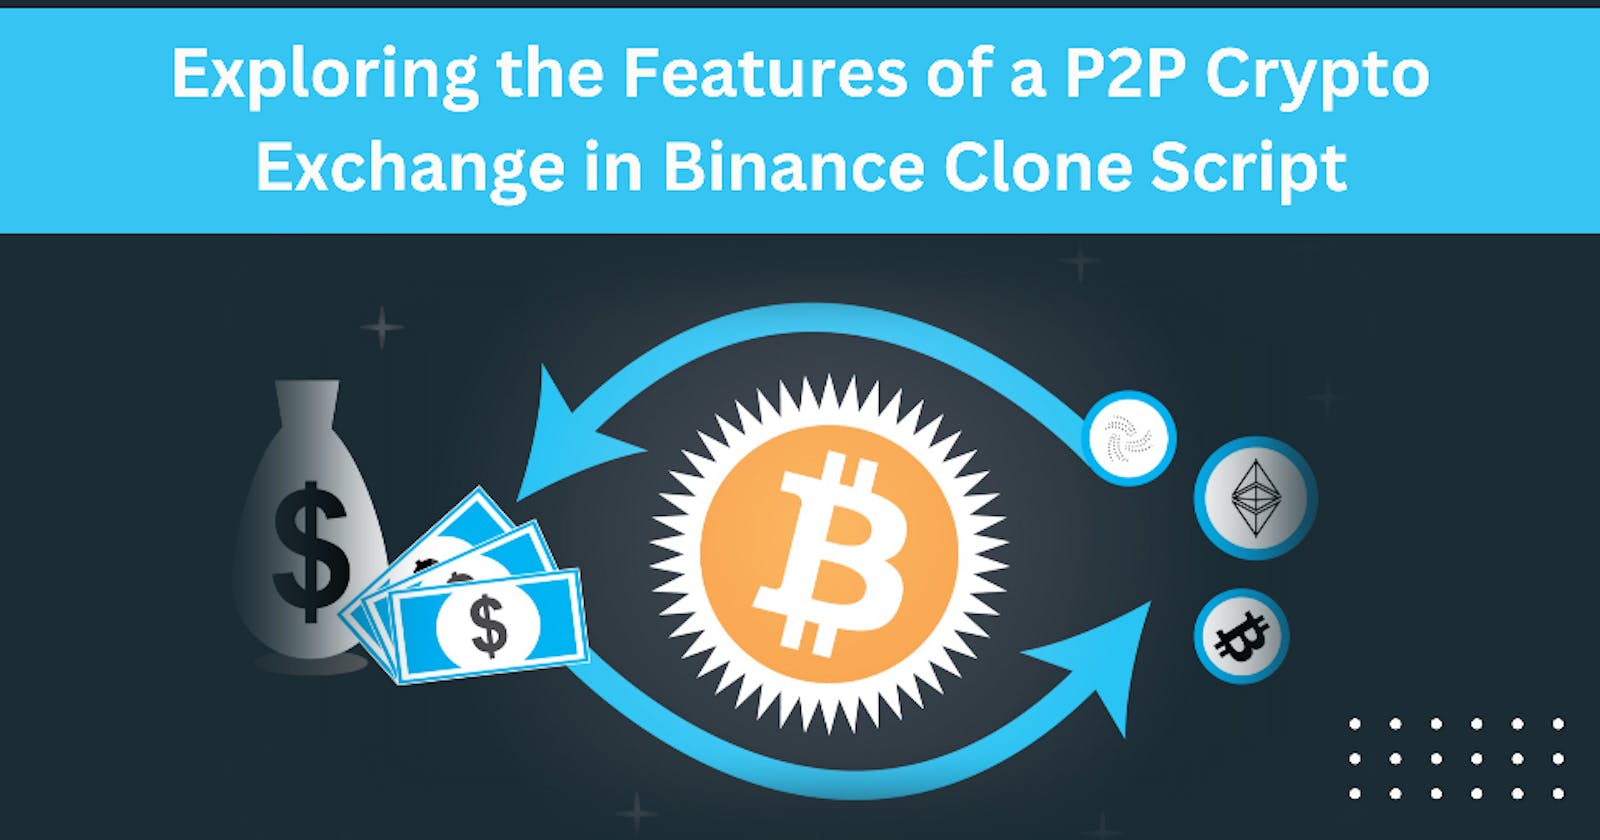 Exploring the Features of a P2P Crypto Exchange in Binance Clone Script